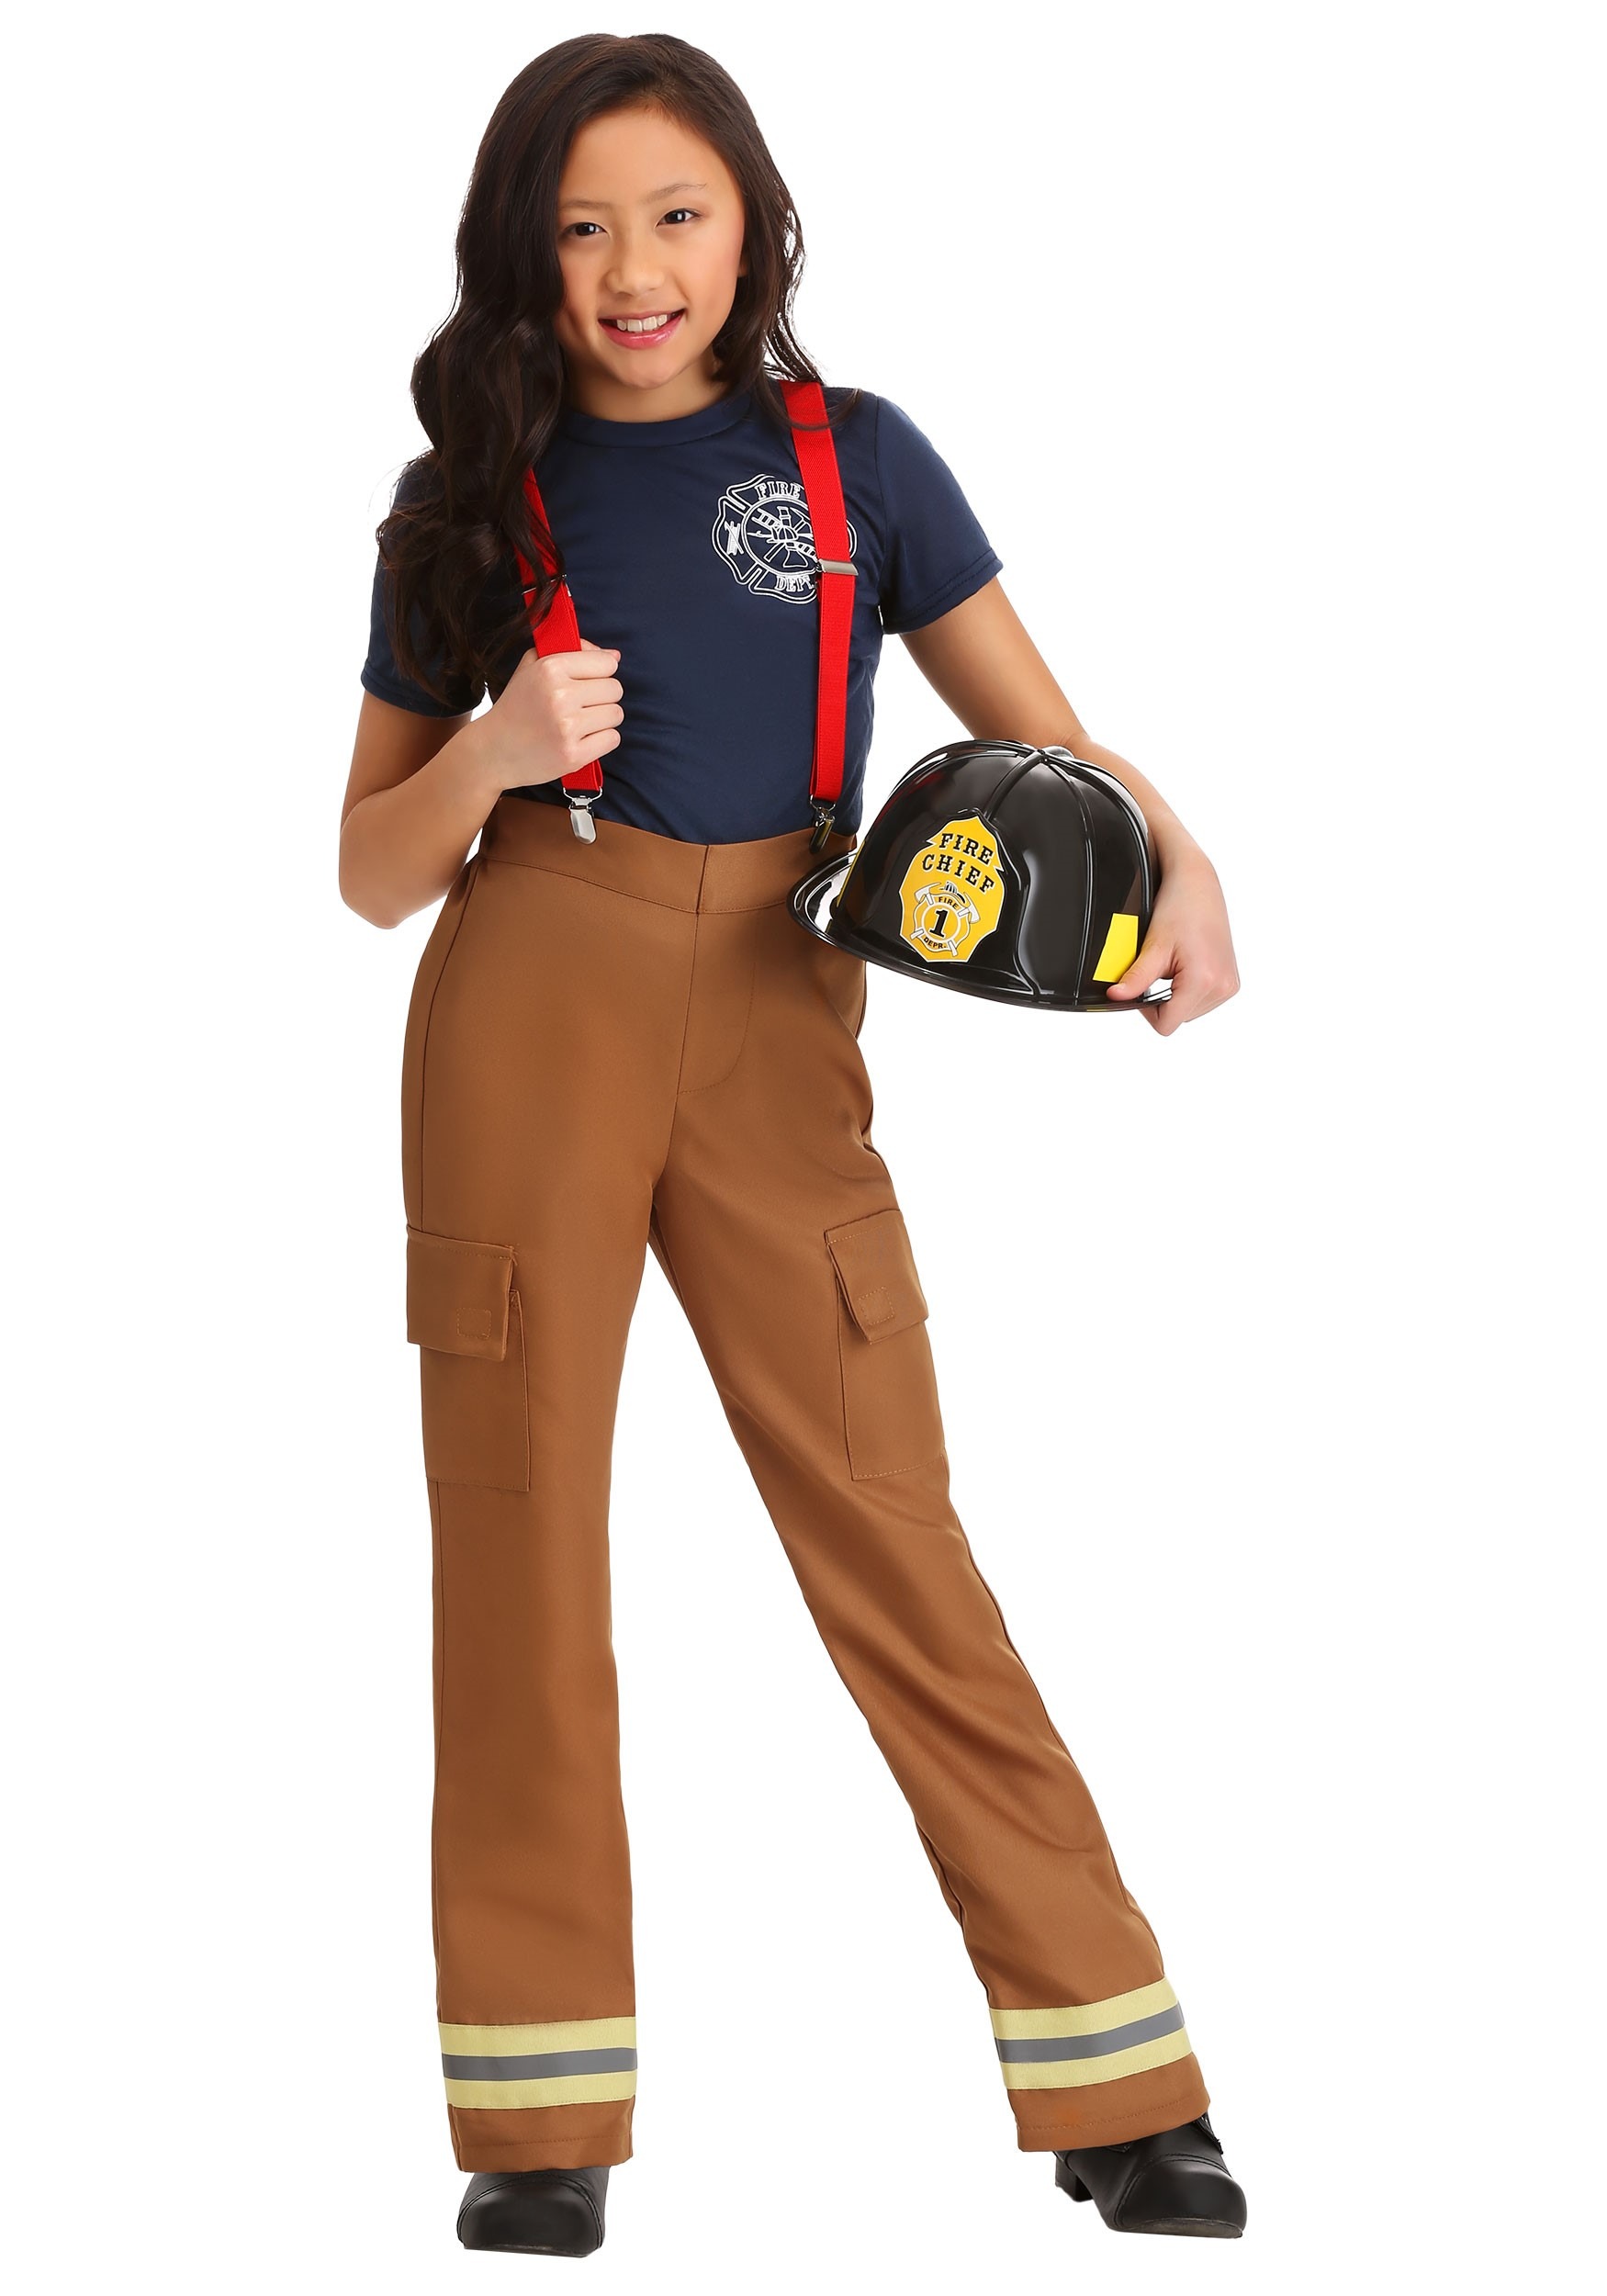 Fire Fighters Captain Costume for Girls